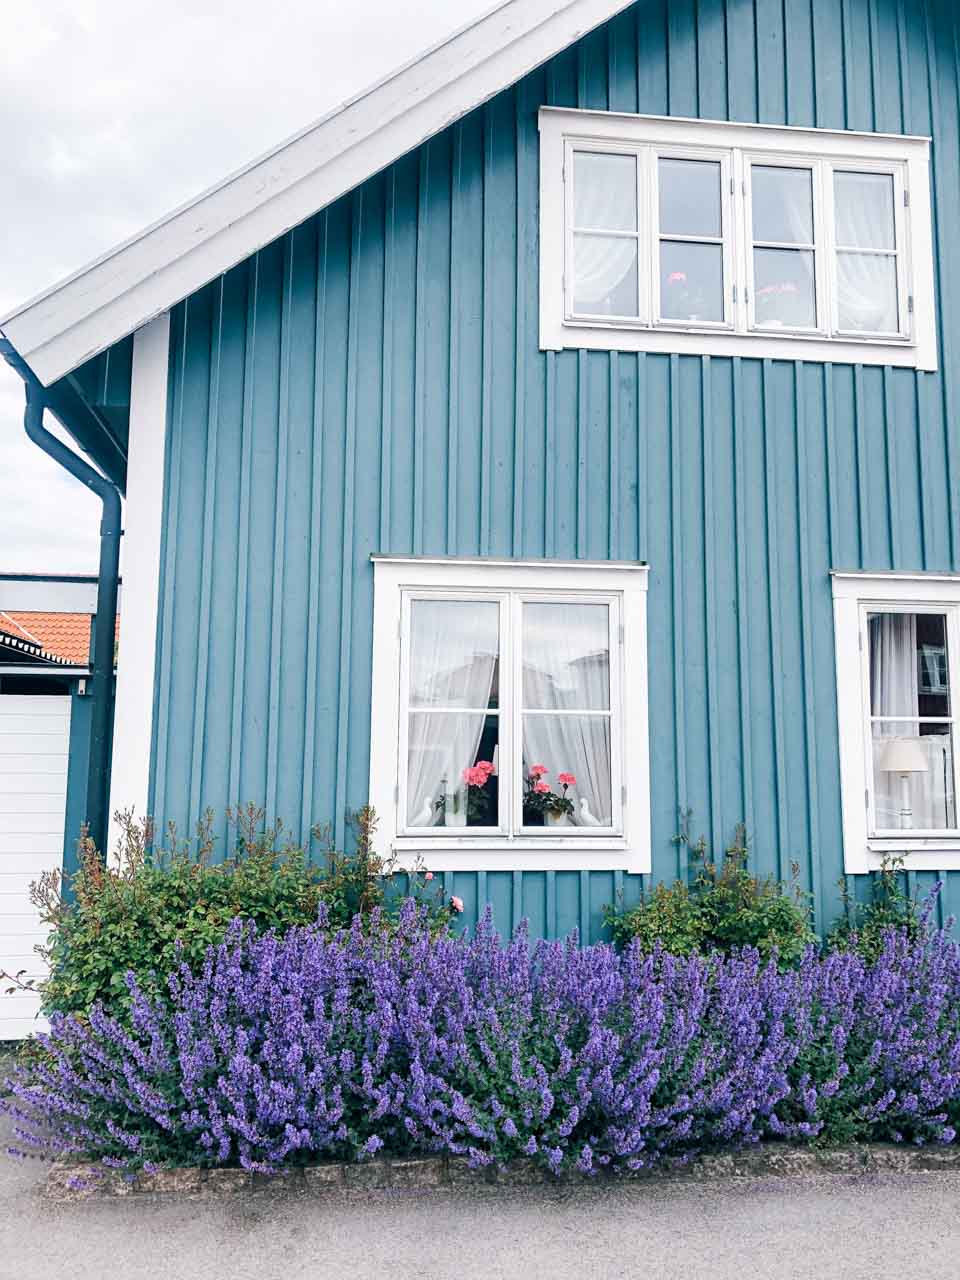 A blue wooden house with a purple bush outside